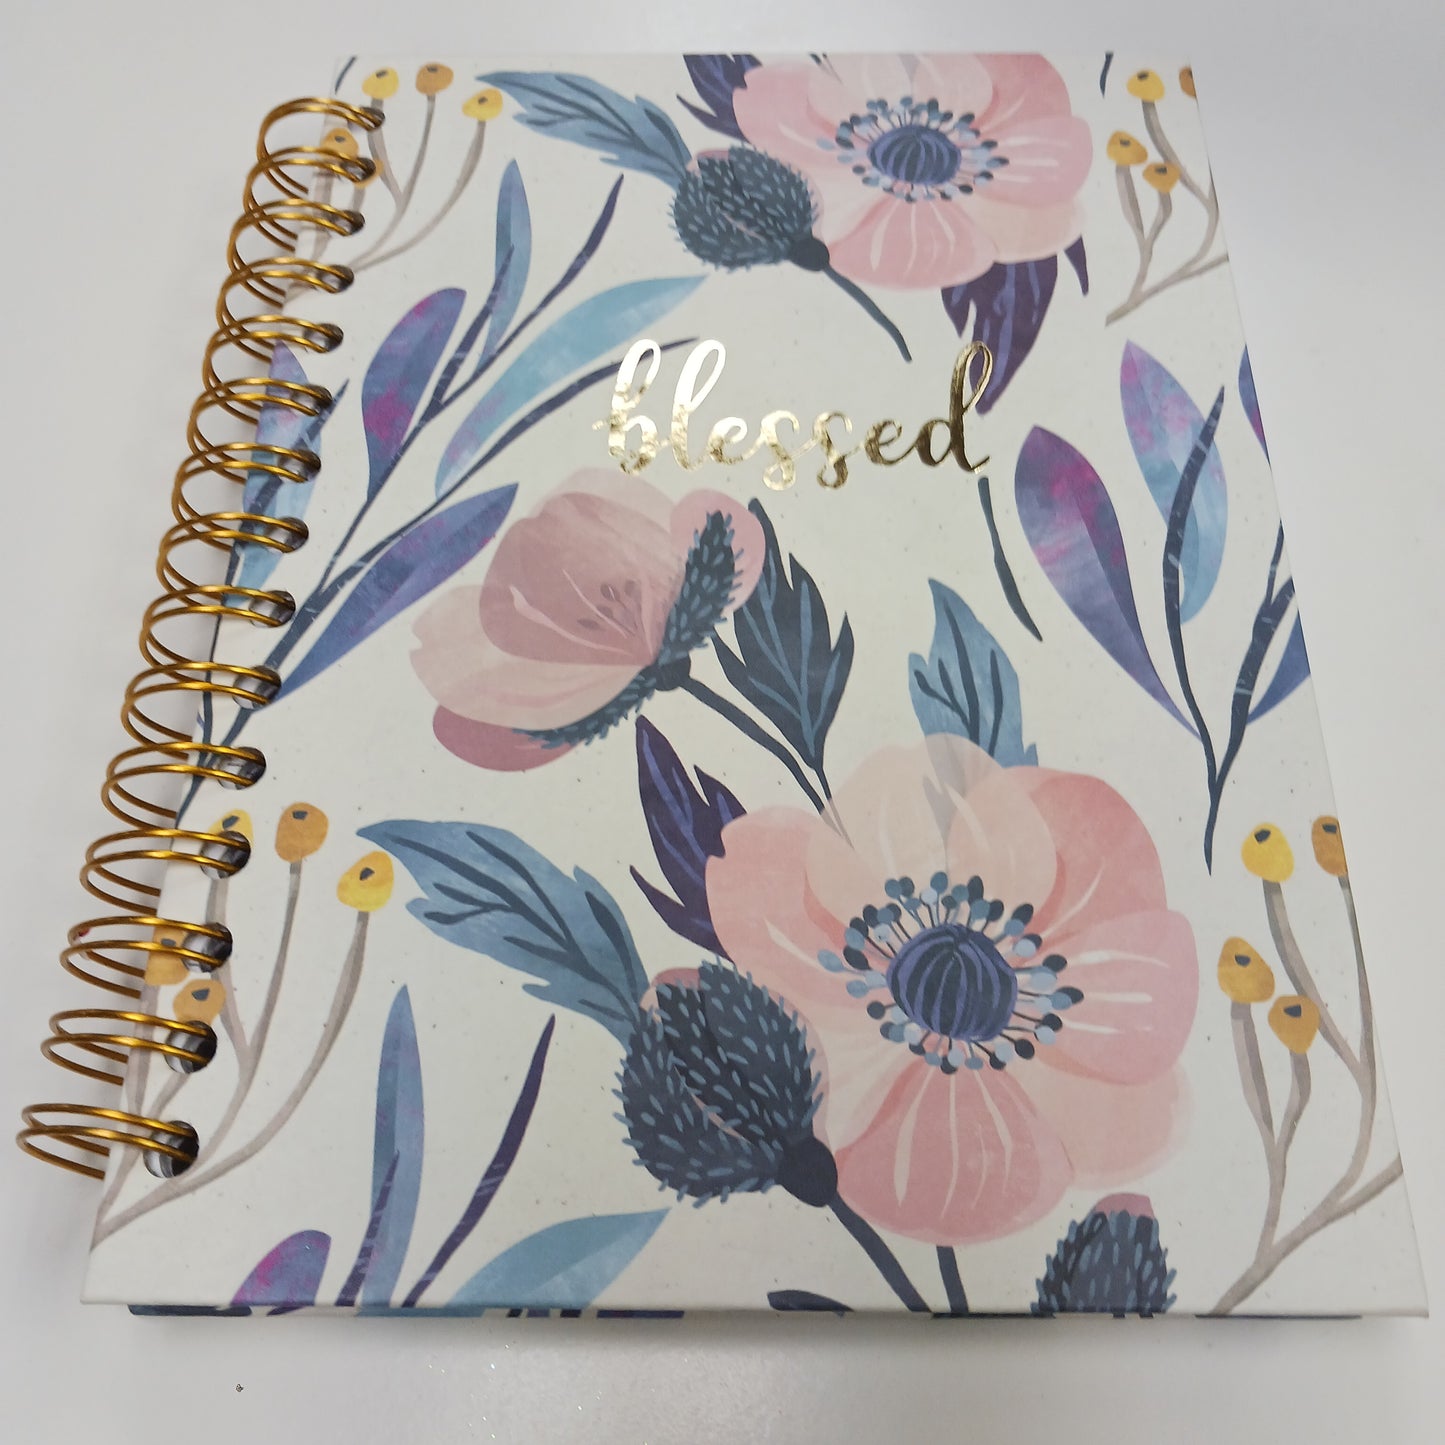 "Blessed" journal